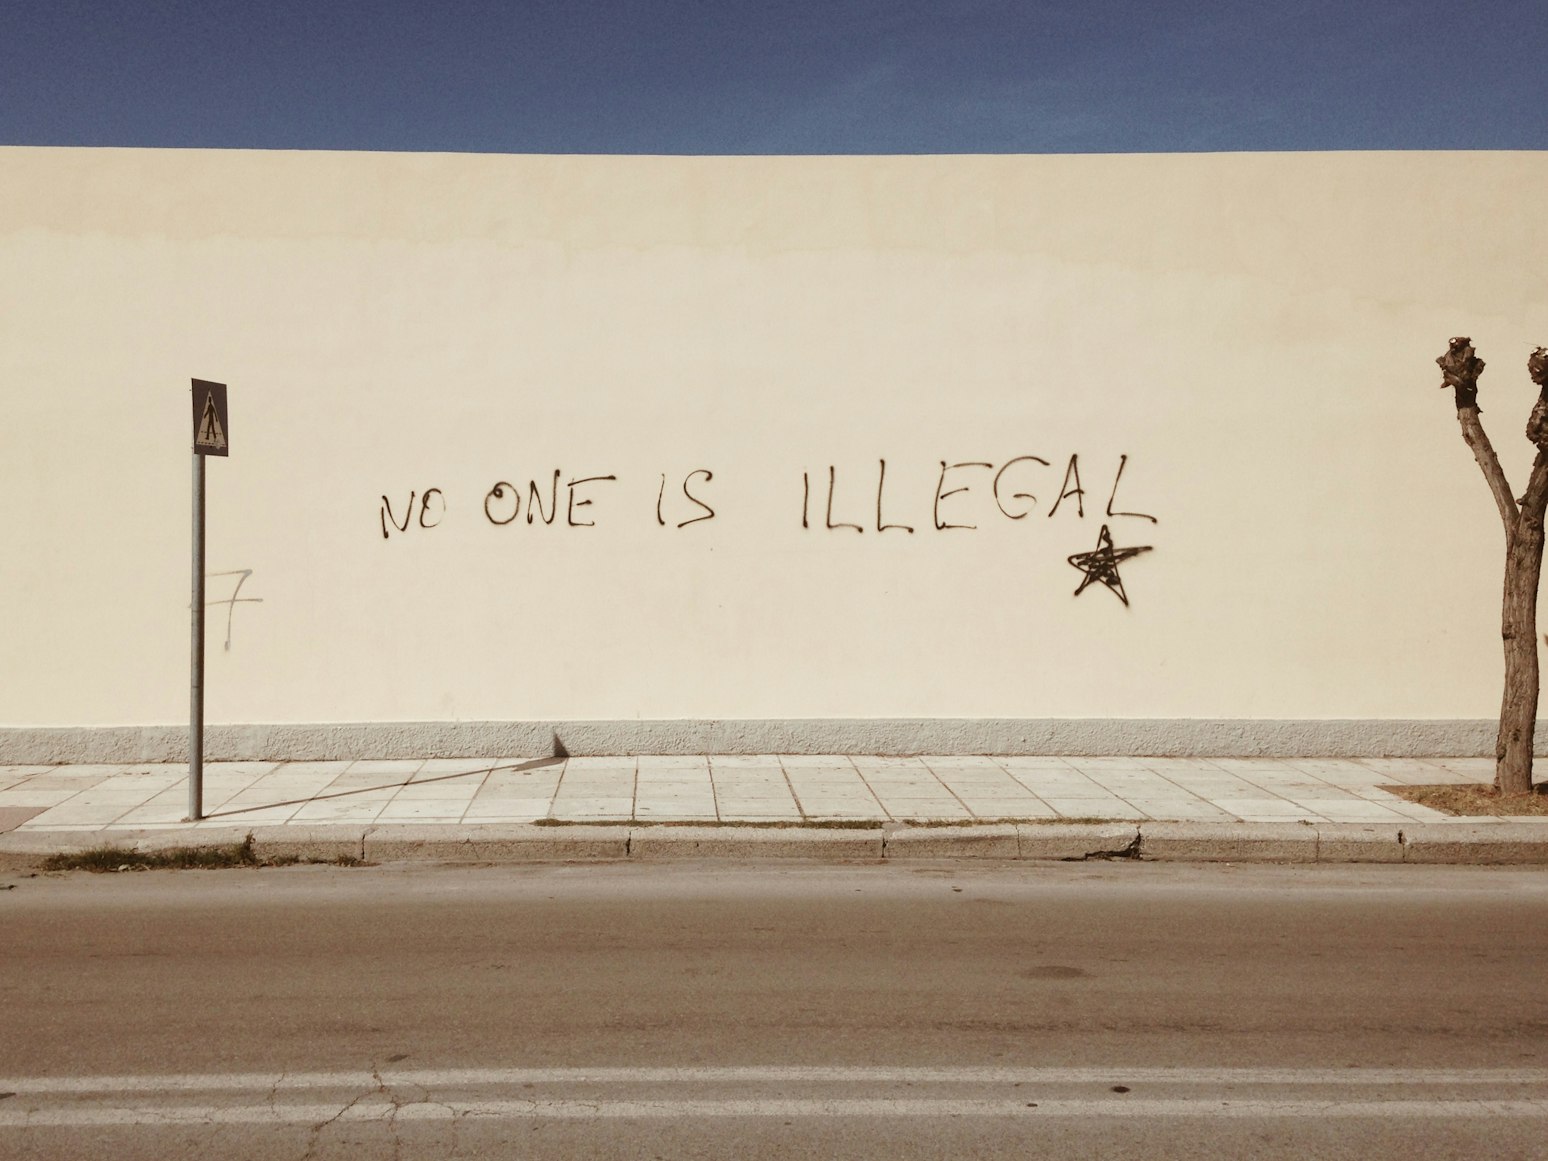  A wall with a pro-immigrant slogan 